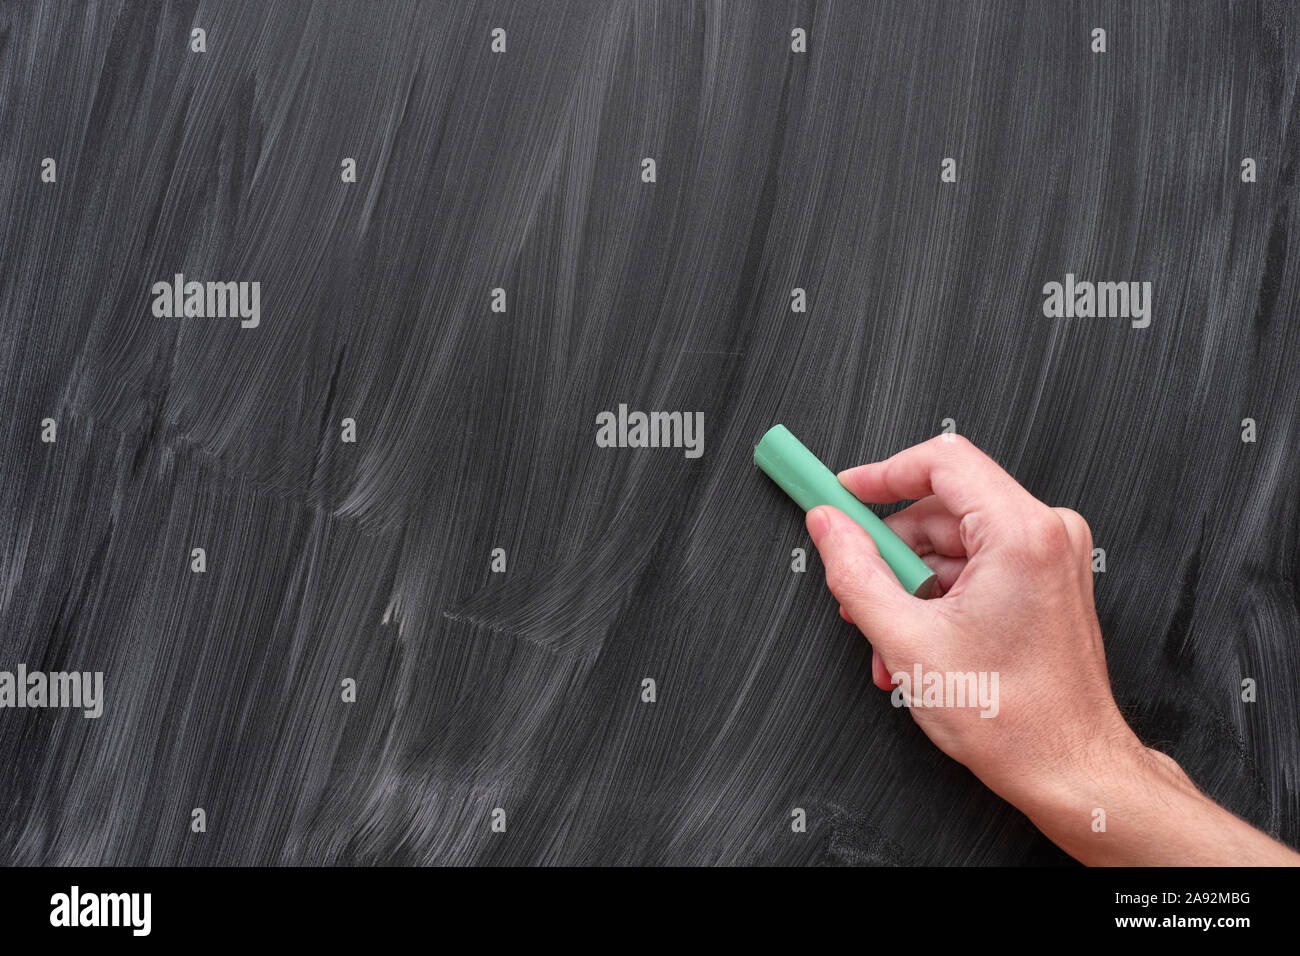 Hand writing on a black chalkboard with green chalk. Close up. Stock Photo